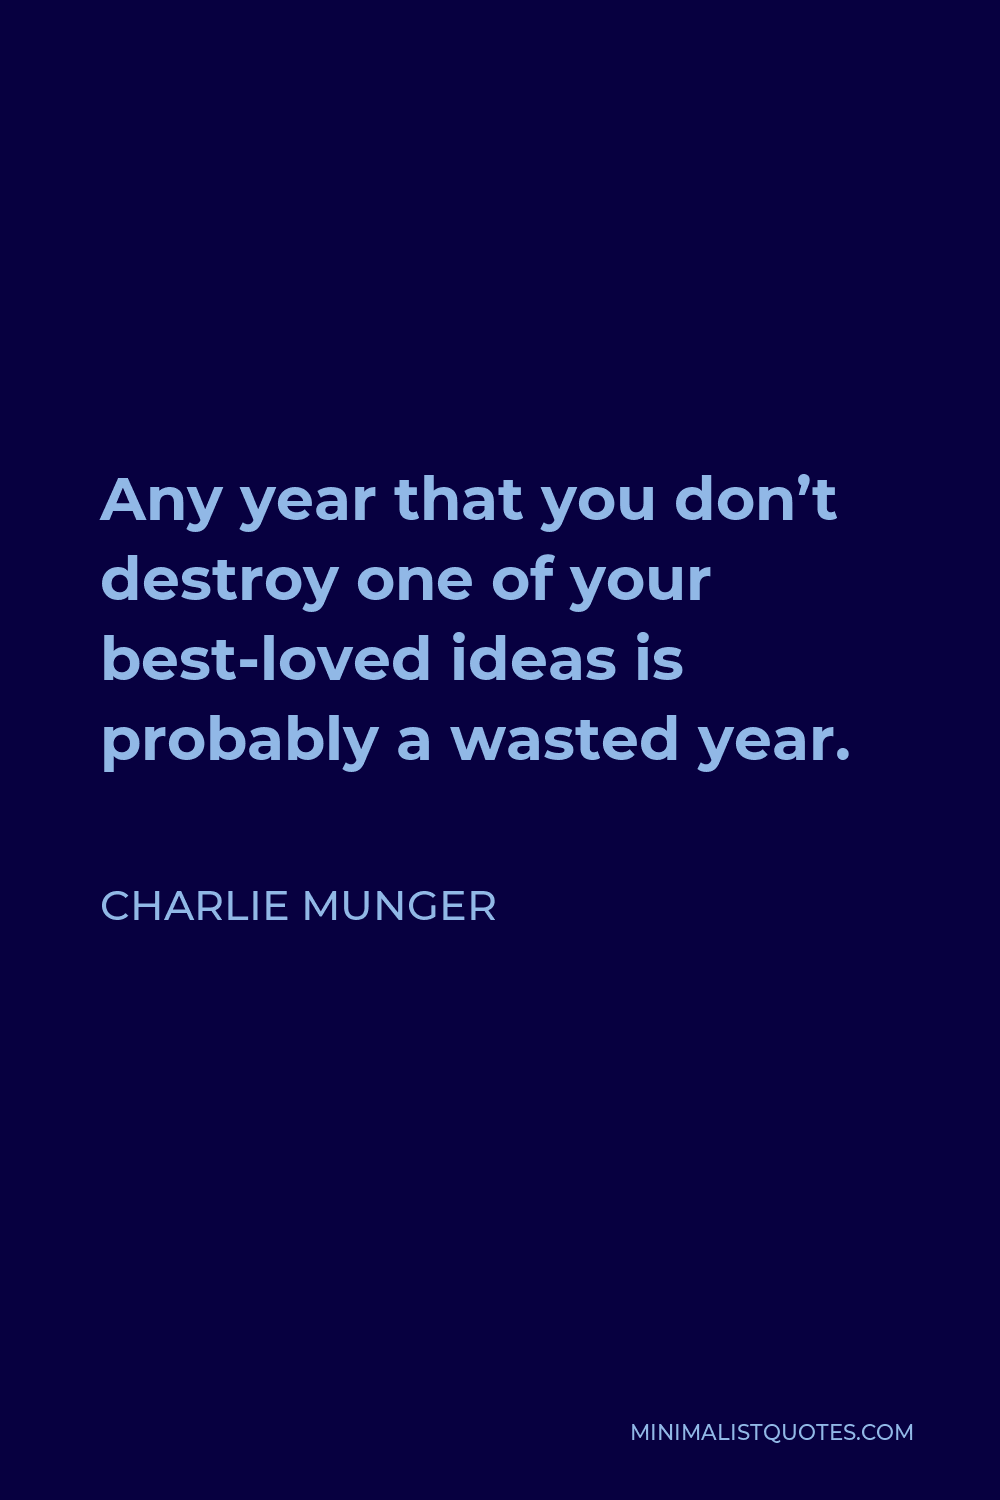 Charlie Munger Quote - Any year that you don’t destroy one of your best-loved ideas is probably a wasted year.